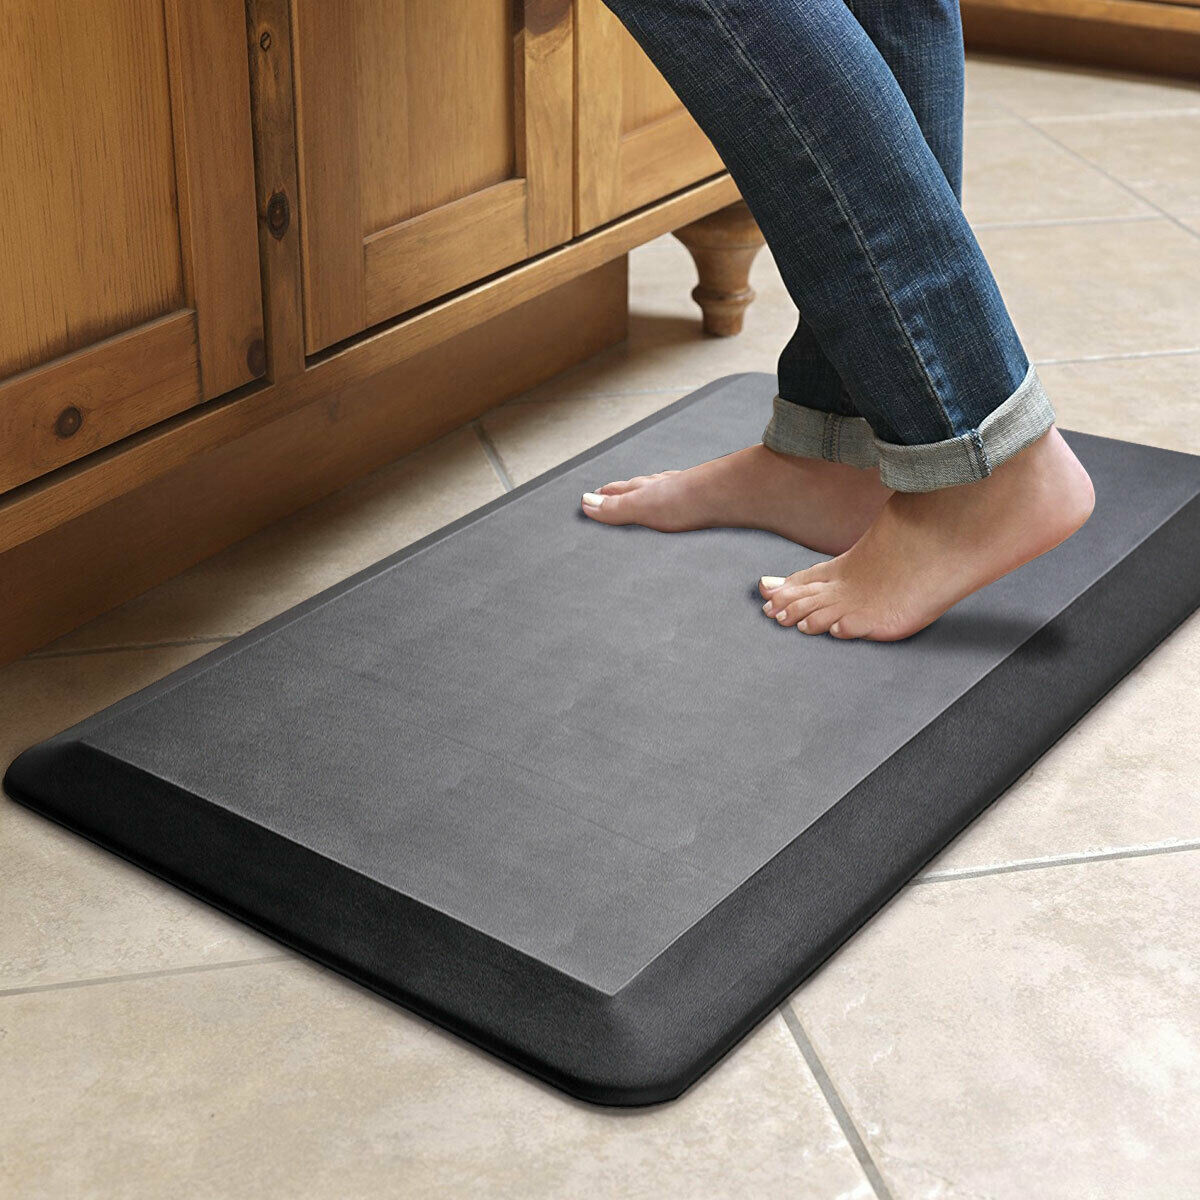 Top 5 Best Anti Fatigue Mats For Kitchen (Review) In 2022